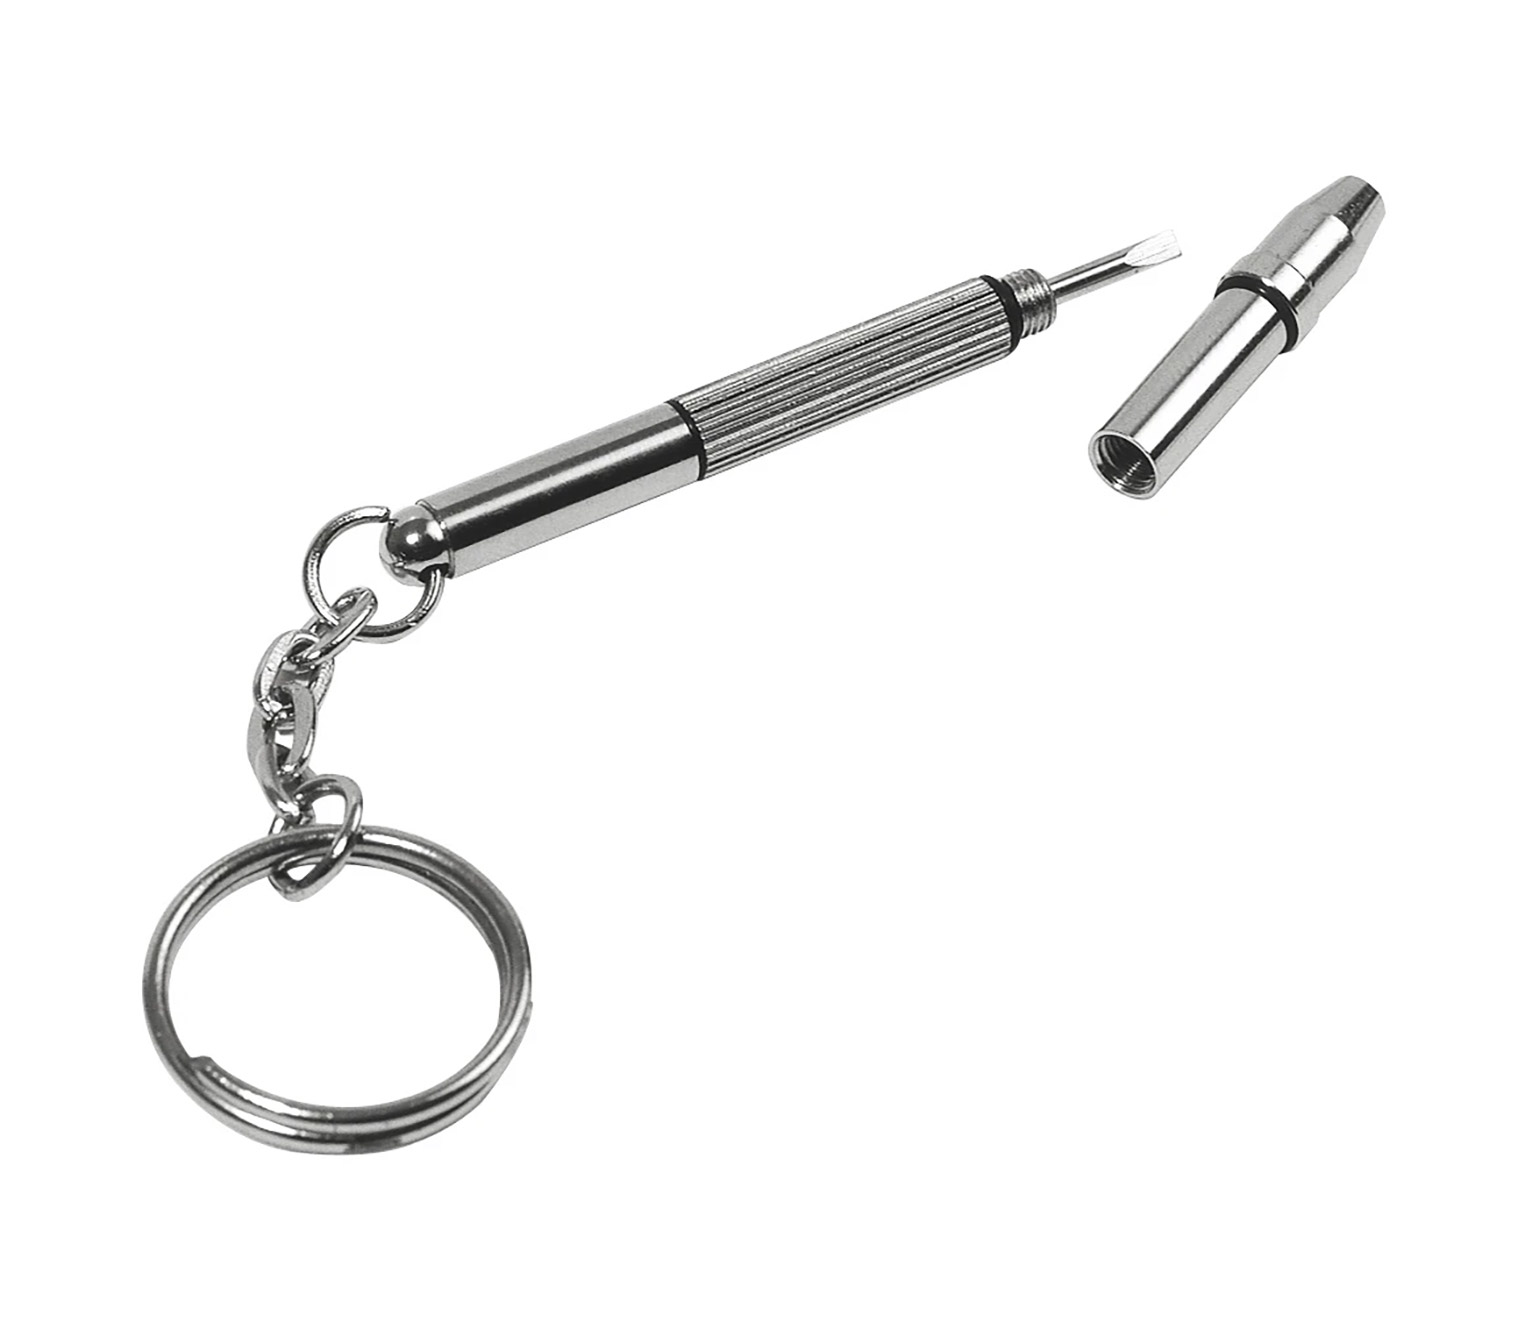 Main Image (Angle) - Screwdriver (Keyring) Glasses Screwdrivers Accessories